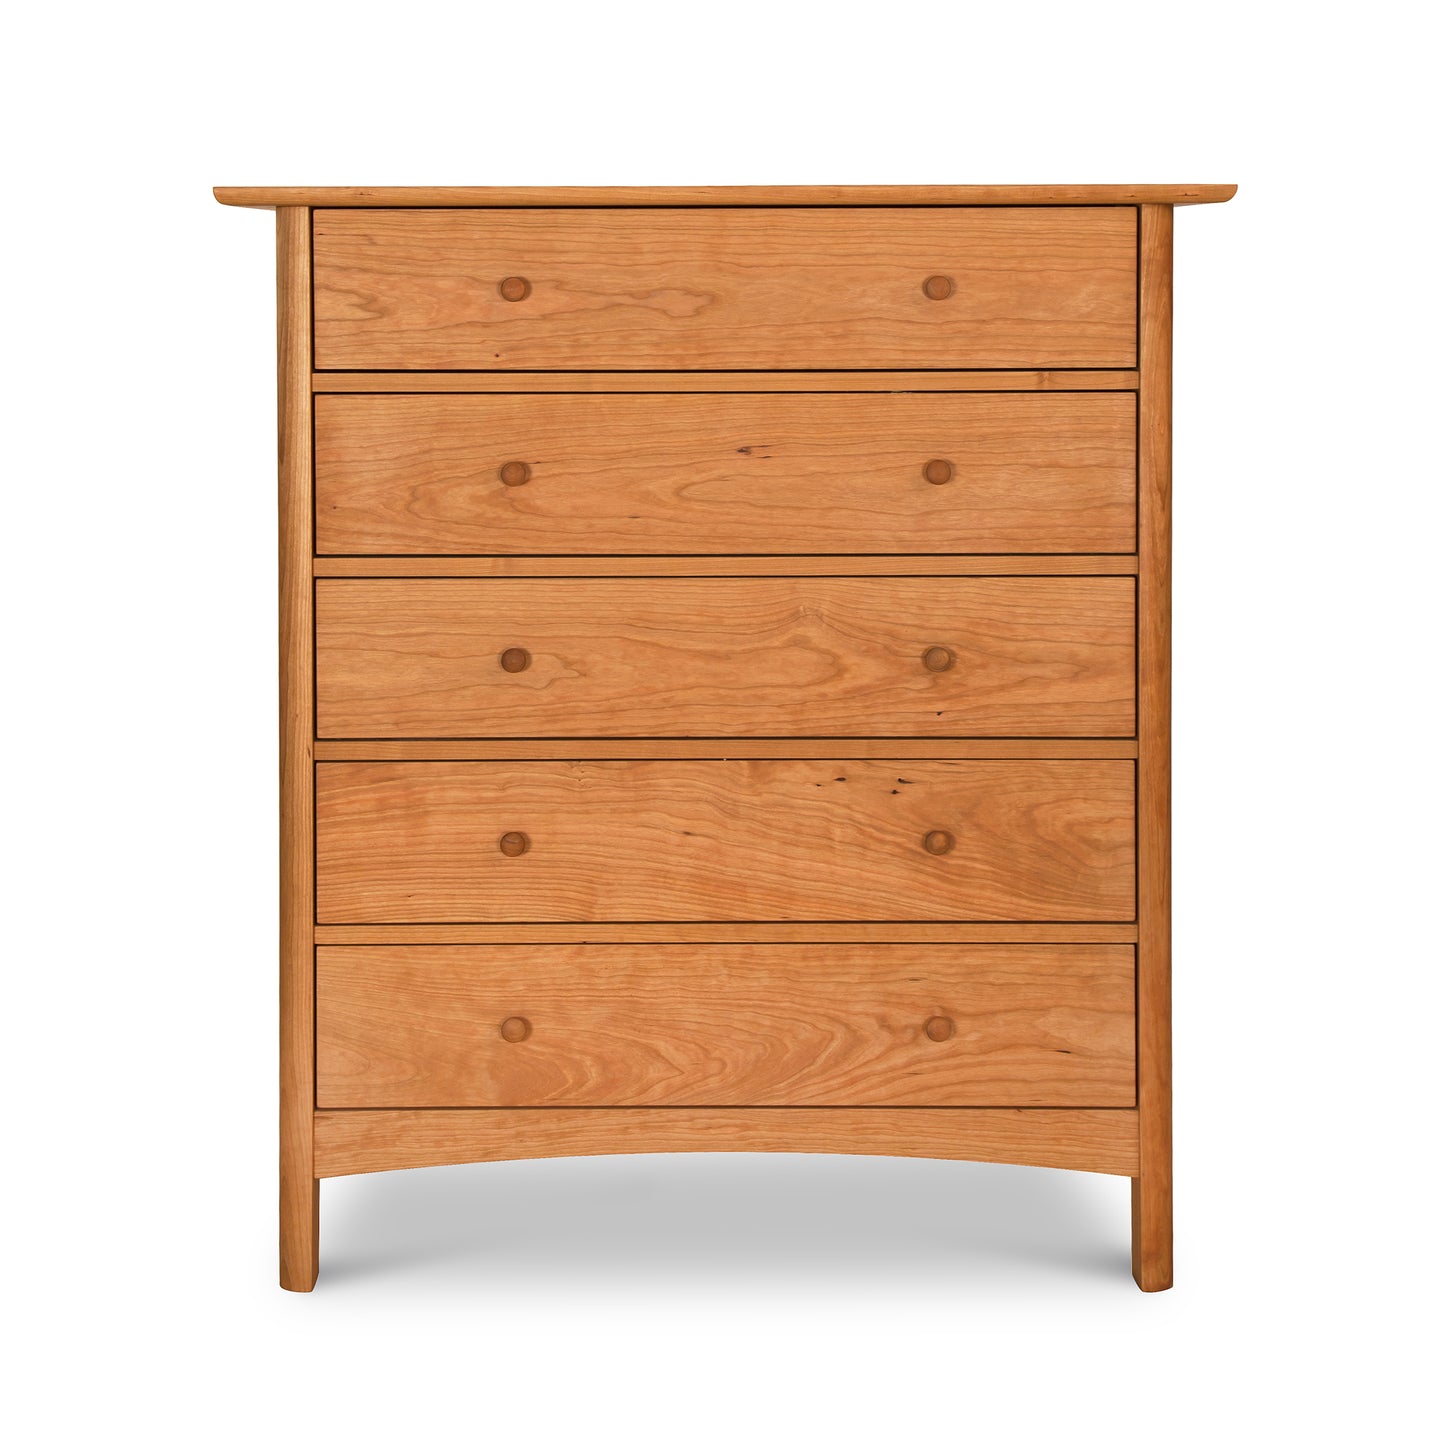 A Heartwood Shaker 5-Drawer Chest by Vermont Furniture Designs isolated on a white background.